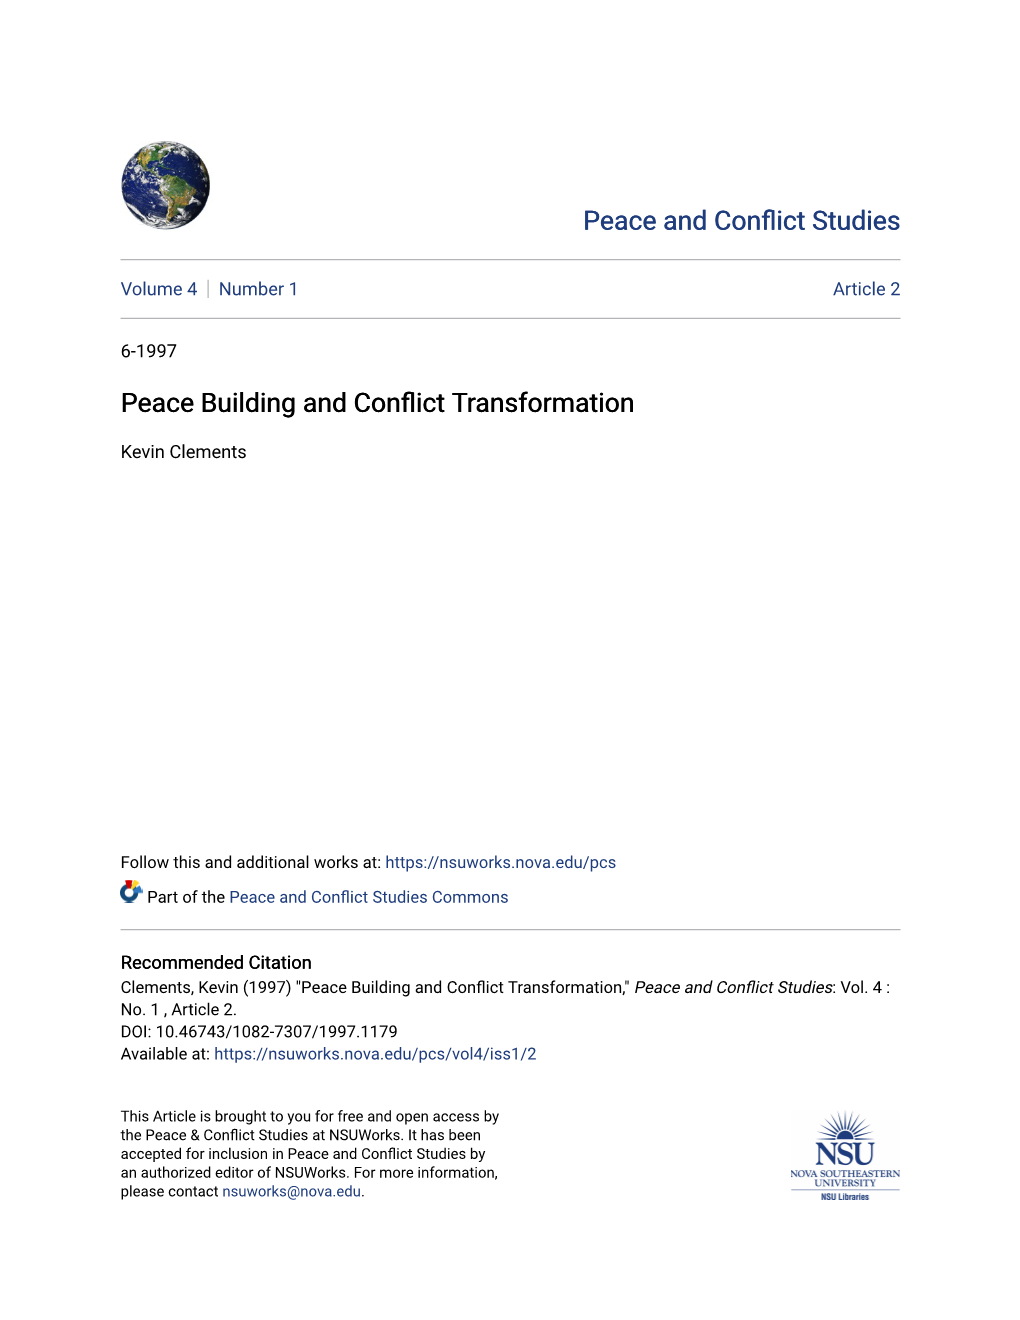 Peace Building and Conflict Transformation